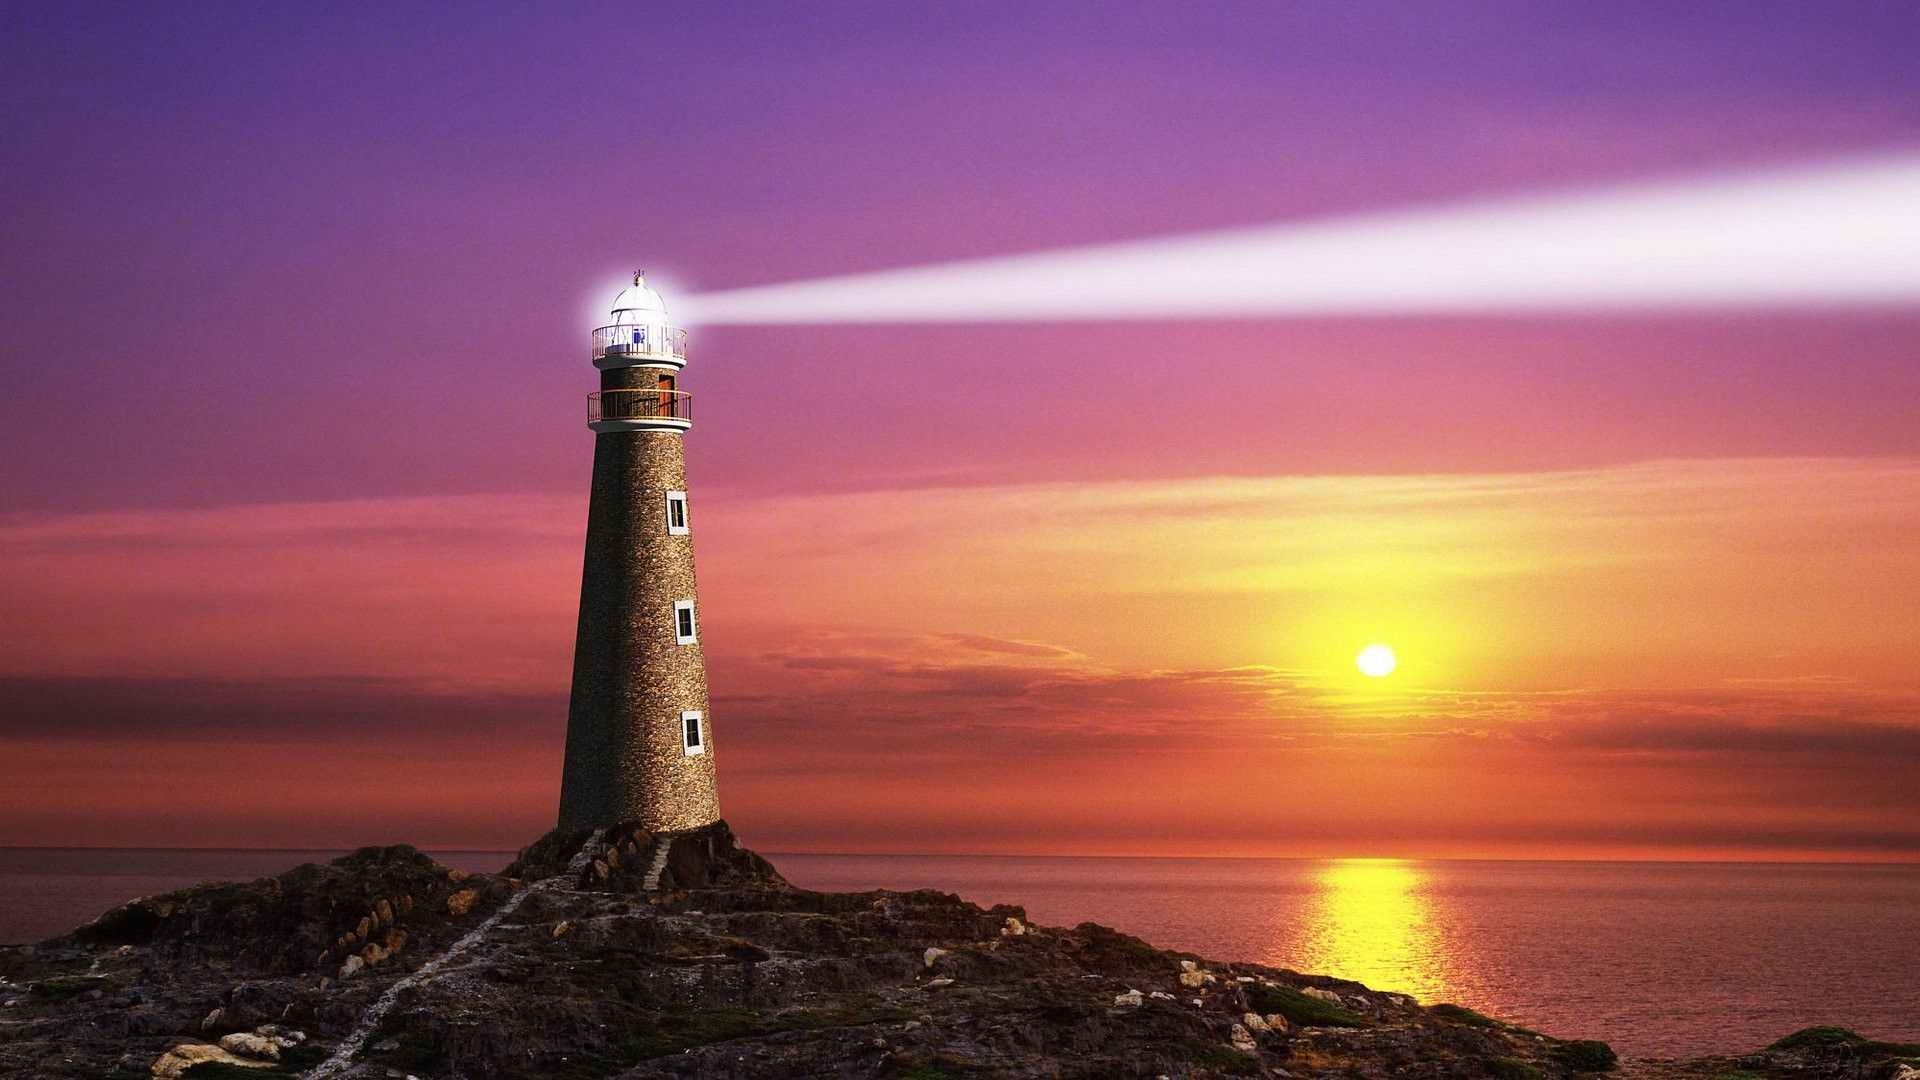 Lighthouse Wallpaper photos of How to Download Free Beautiful ...